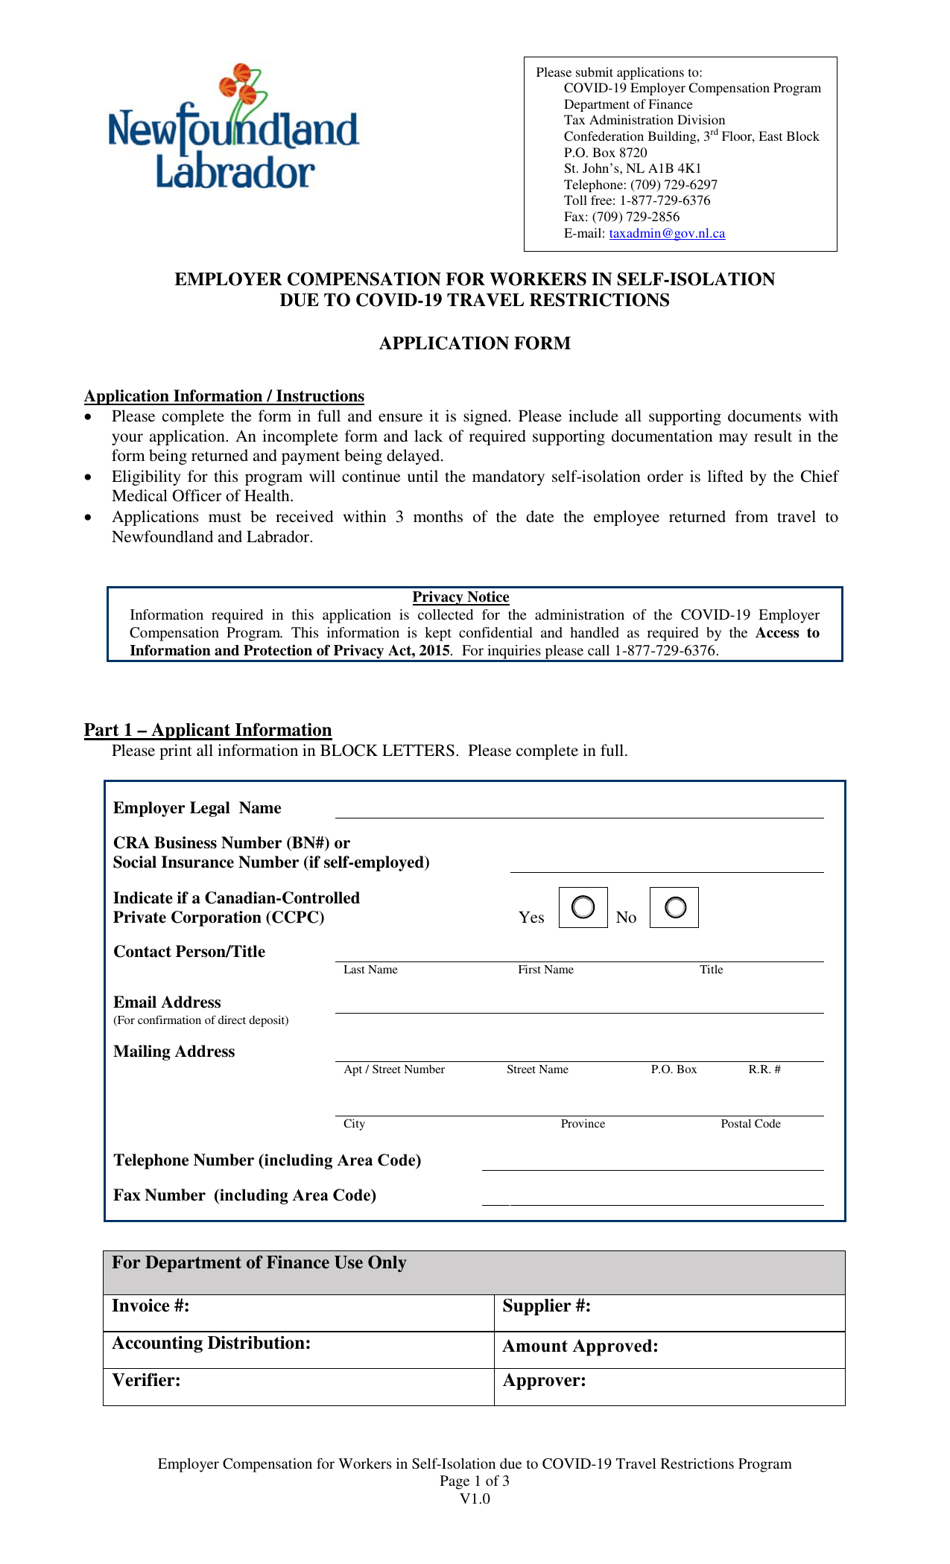 Employer Compensation for Workers in Self-isolation Due to Covid-19 Travel Restrictions Application Form - Newfoundland and Labrador, Canada, Page 1